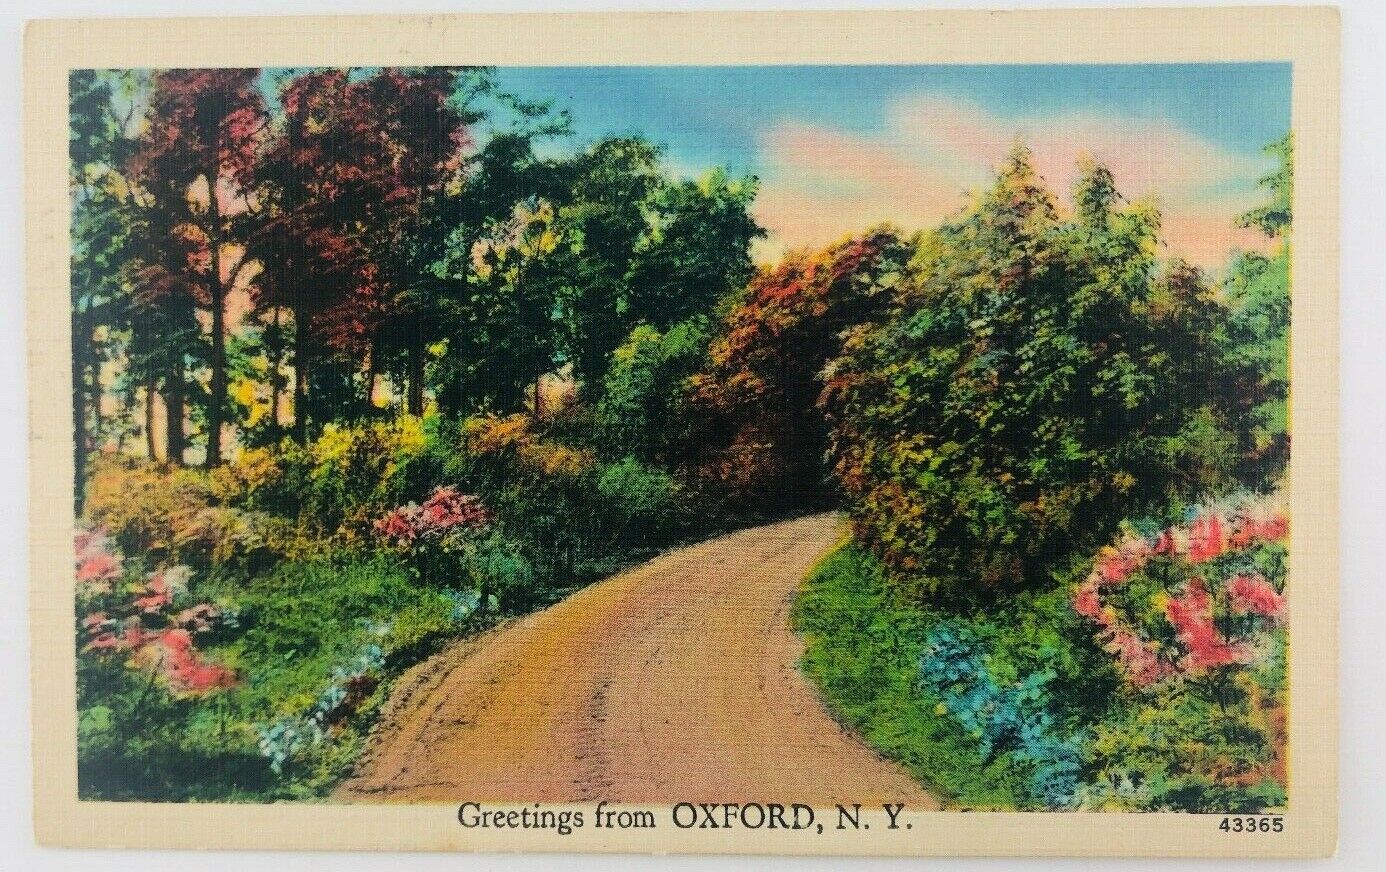 Vintage Oxford New York NY Greetings from Oxford NY Linen Postcard 1943 Lane 